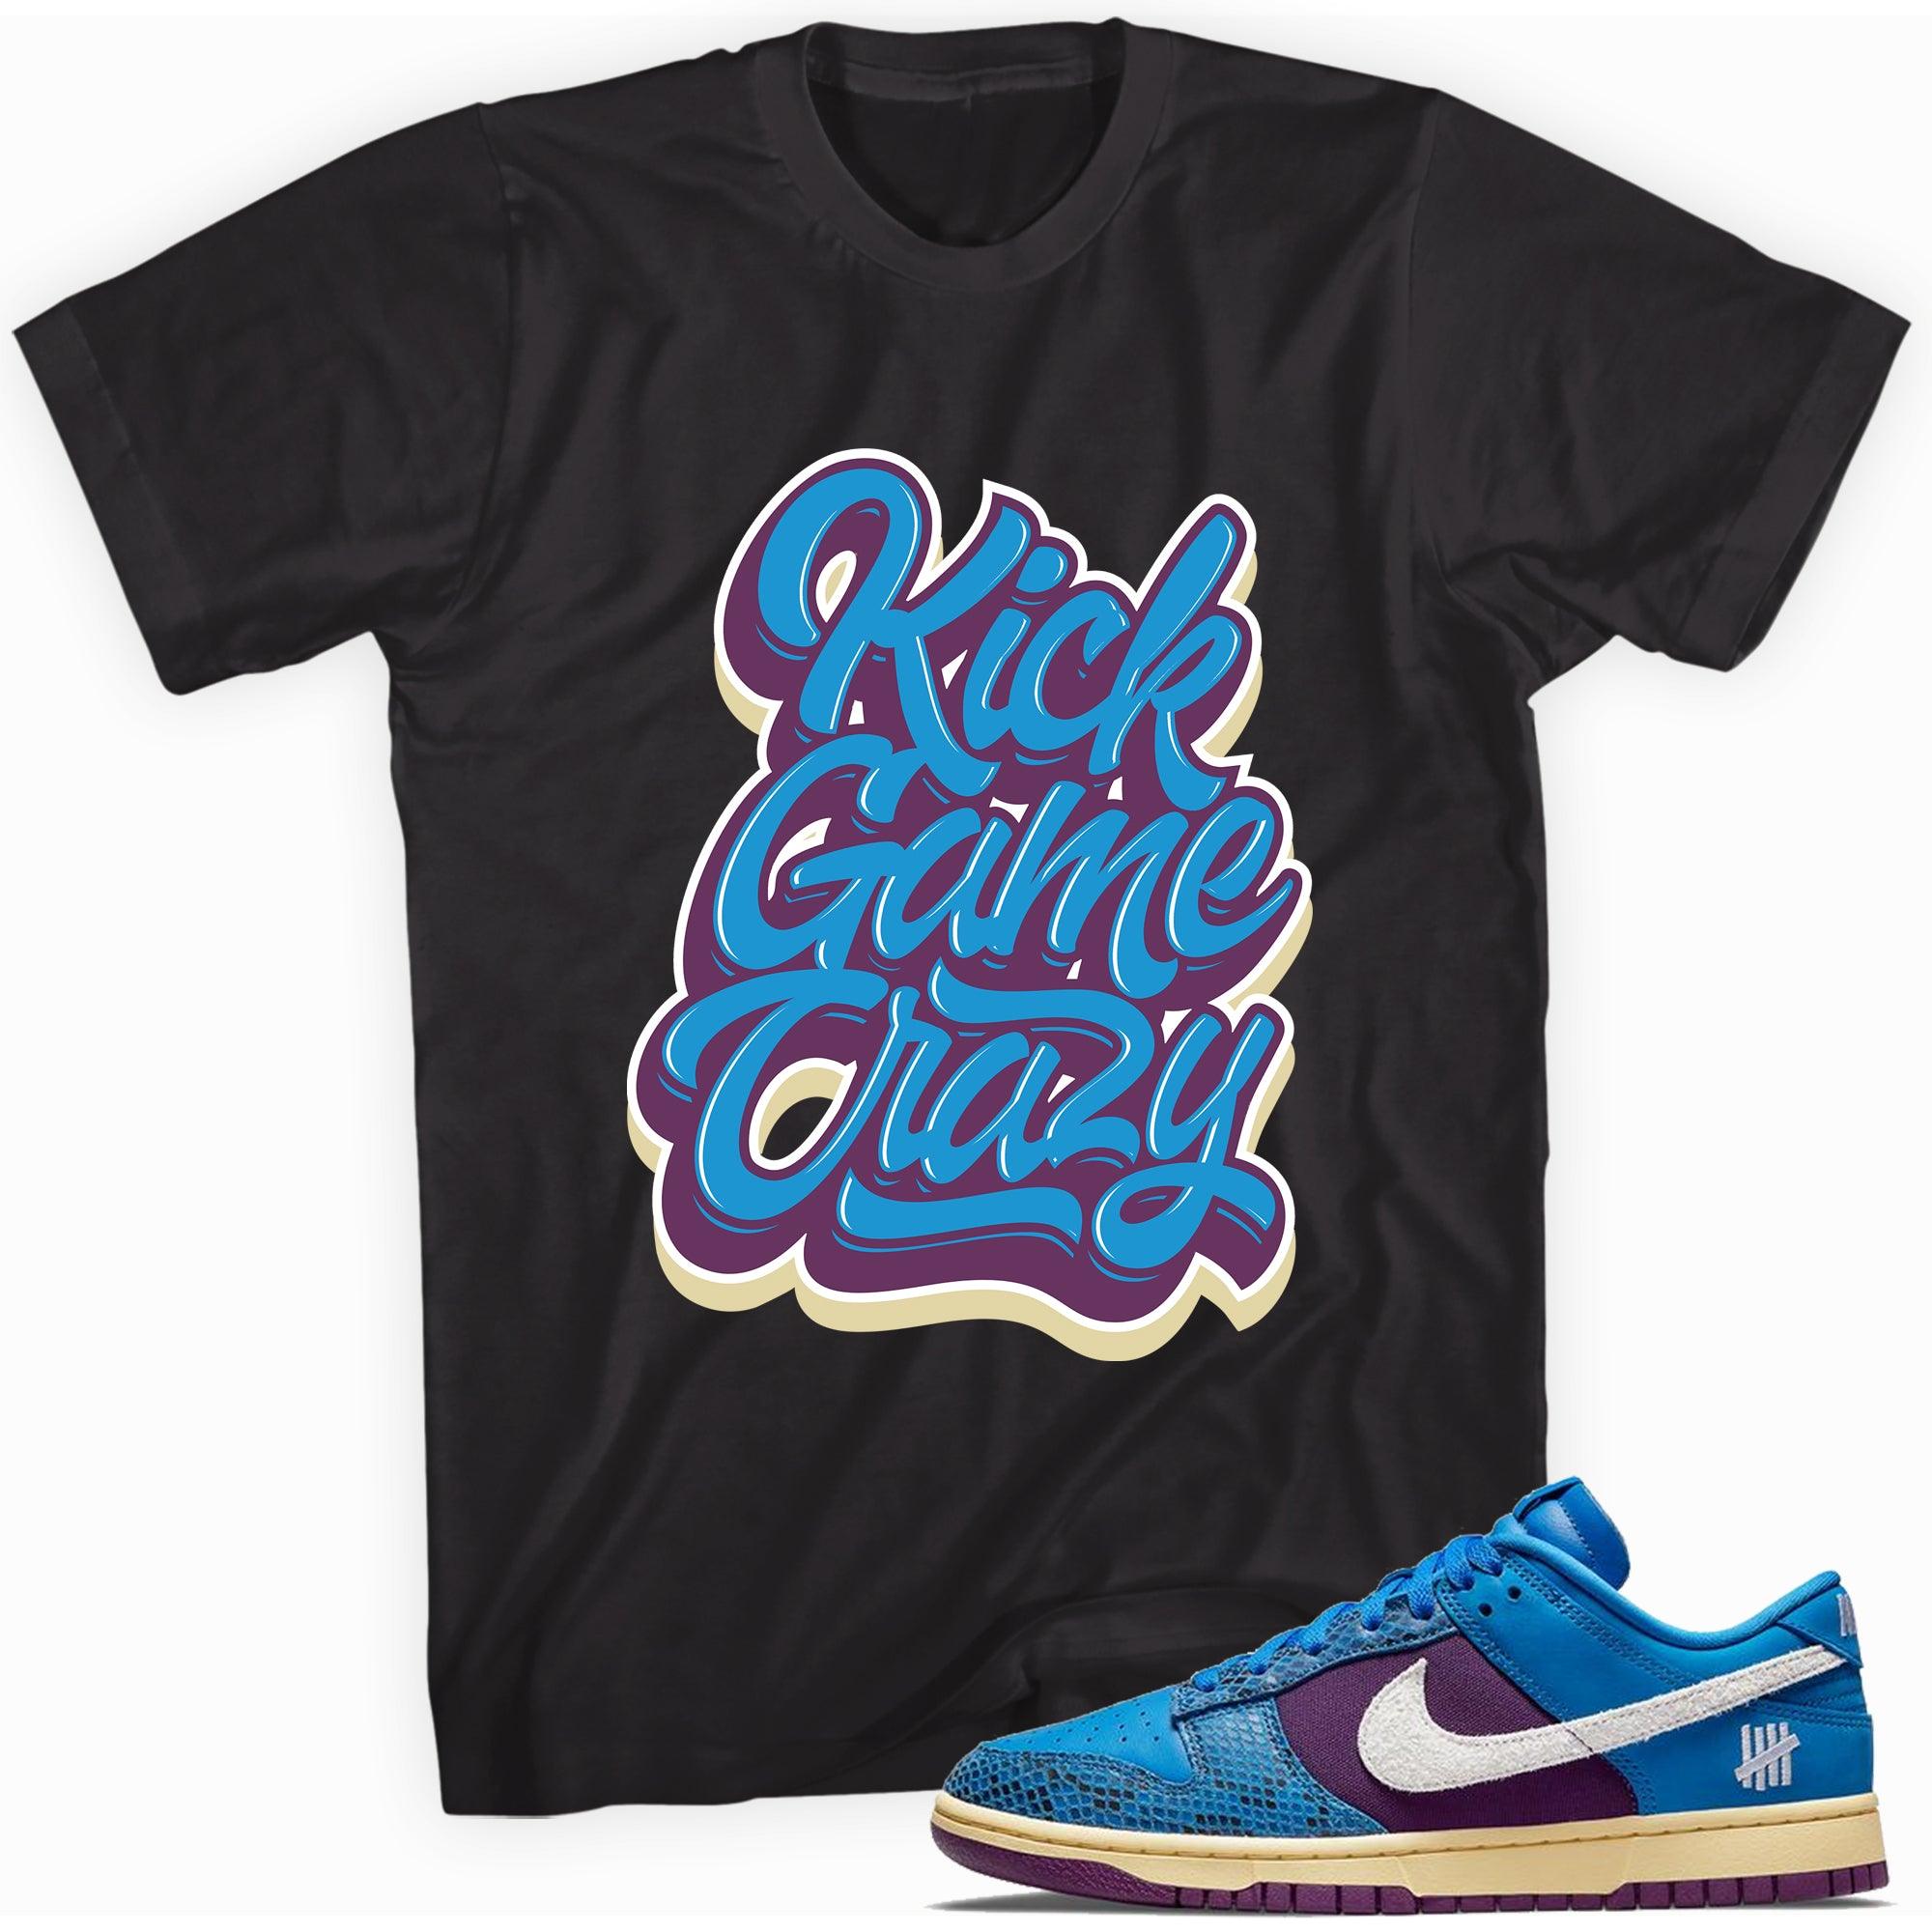 Kick Game Crazy Shirt Nike Dunk Low Undefeated 5 On It Dunk vs AF1 photo